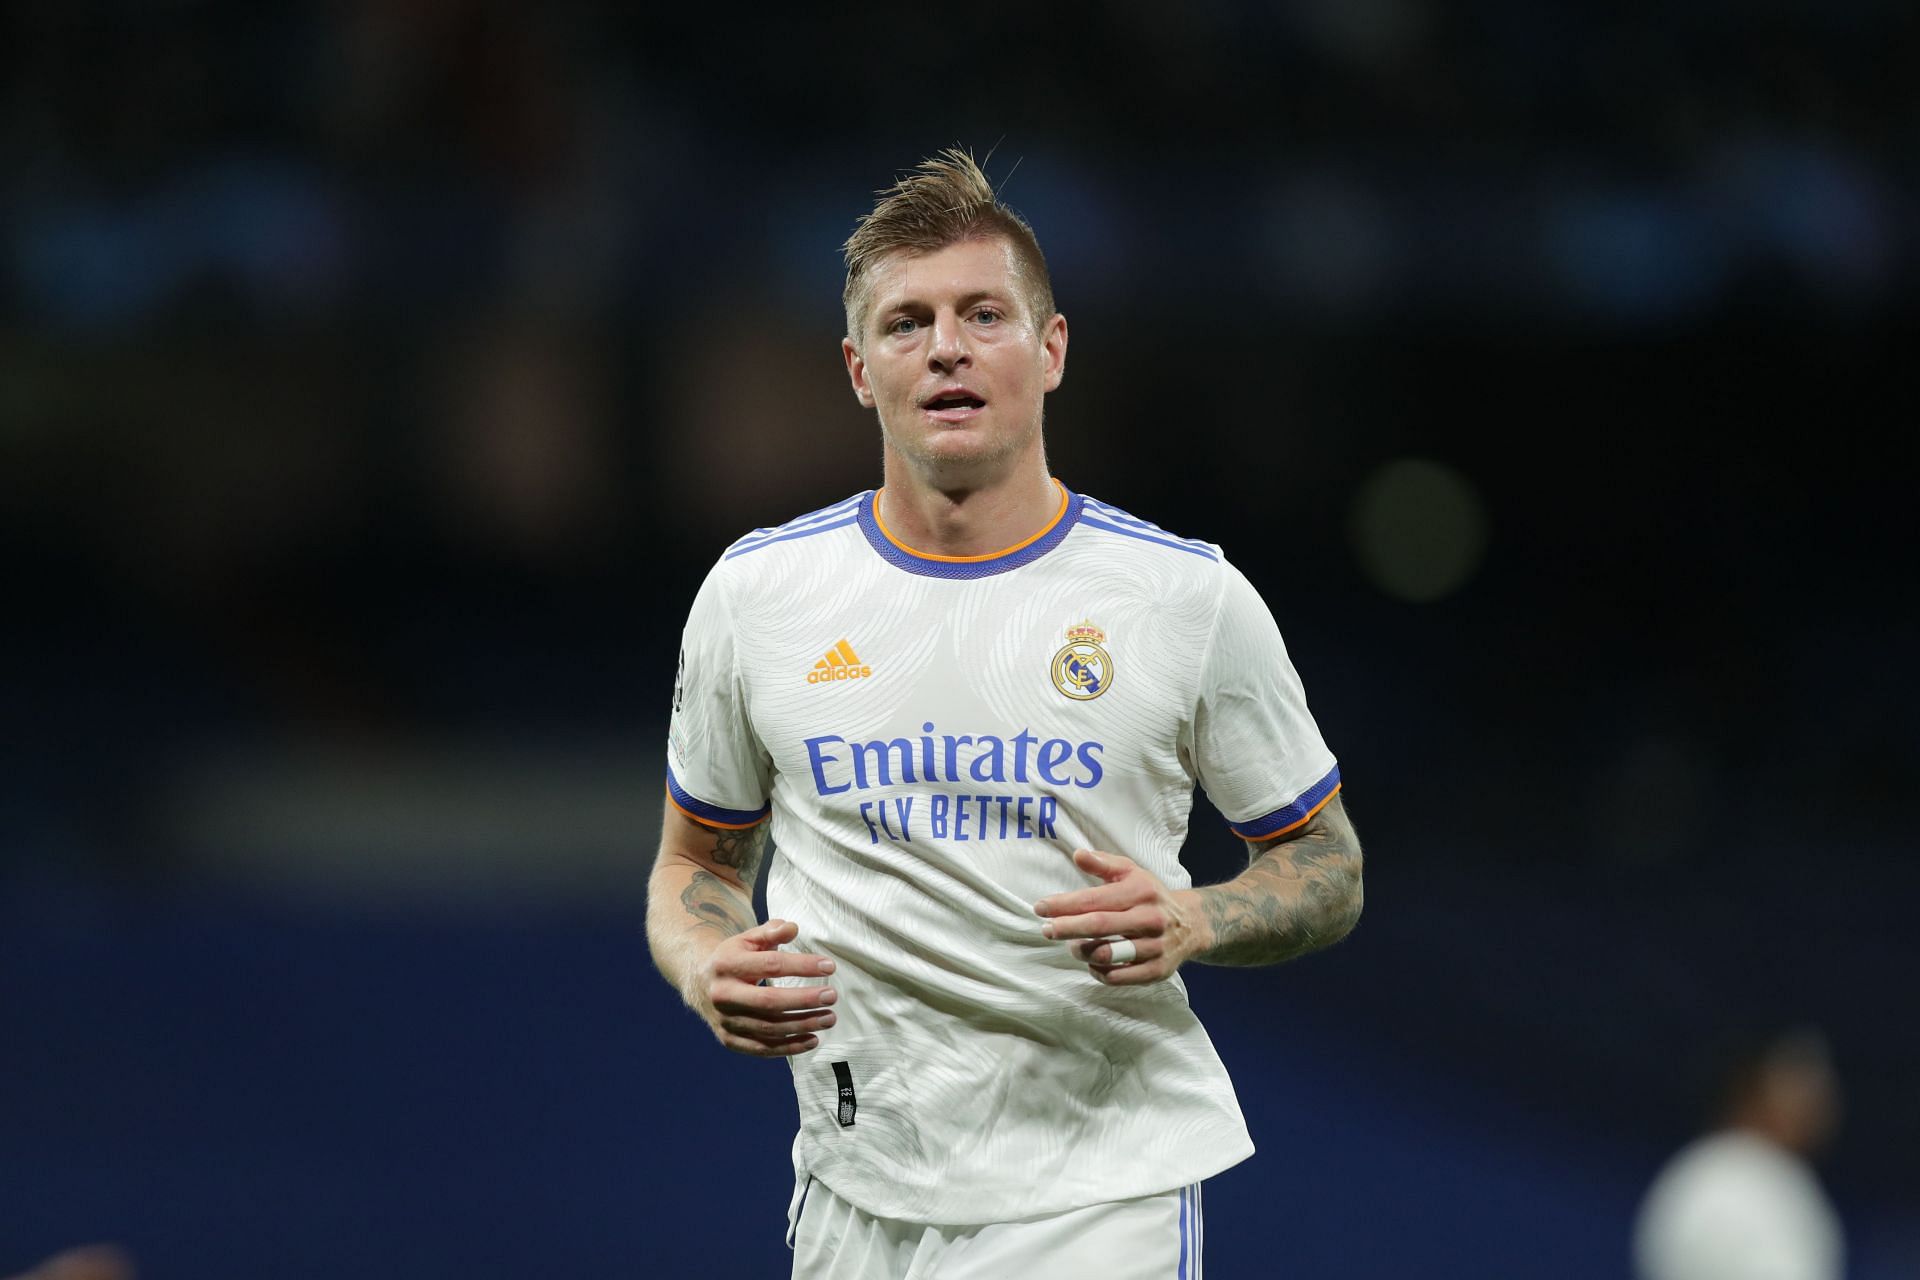 Midfielder Toni Kroos has said that he wants to retire at Real Madrid.